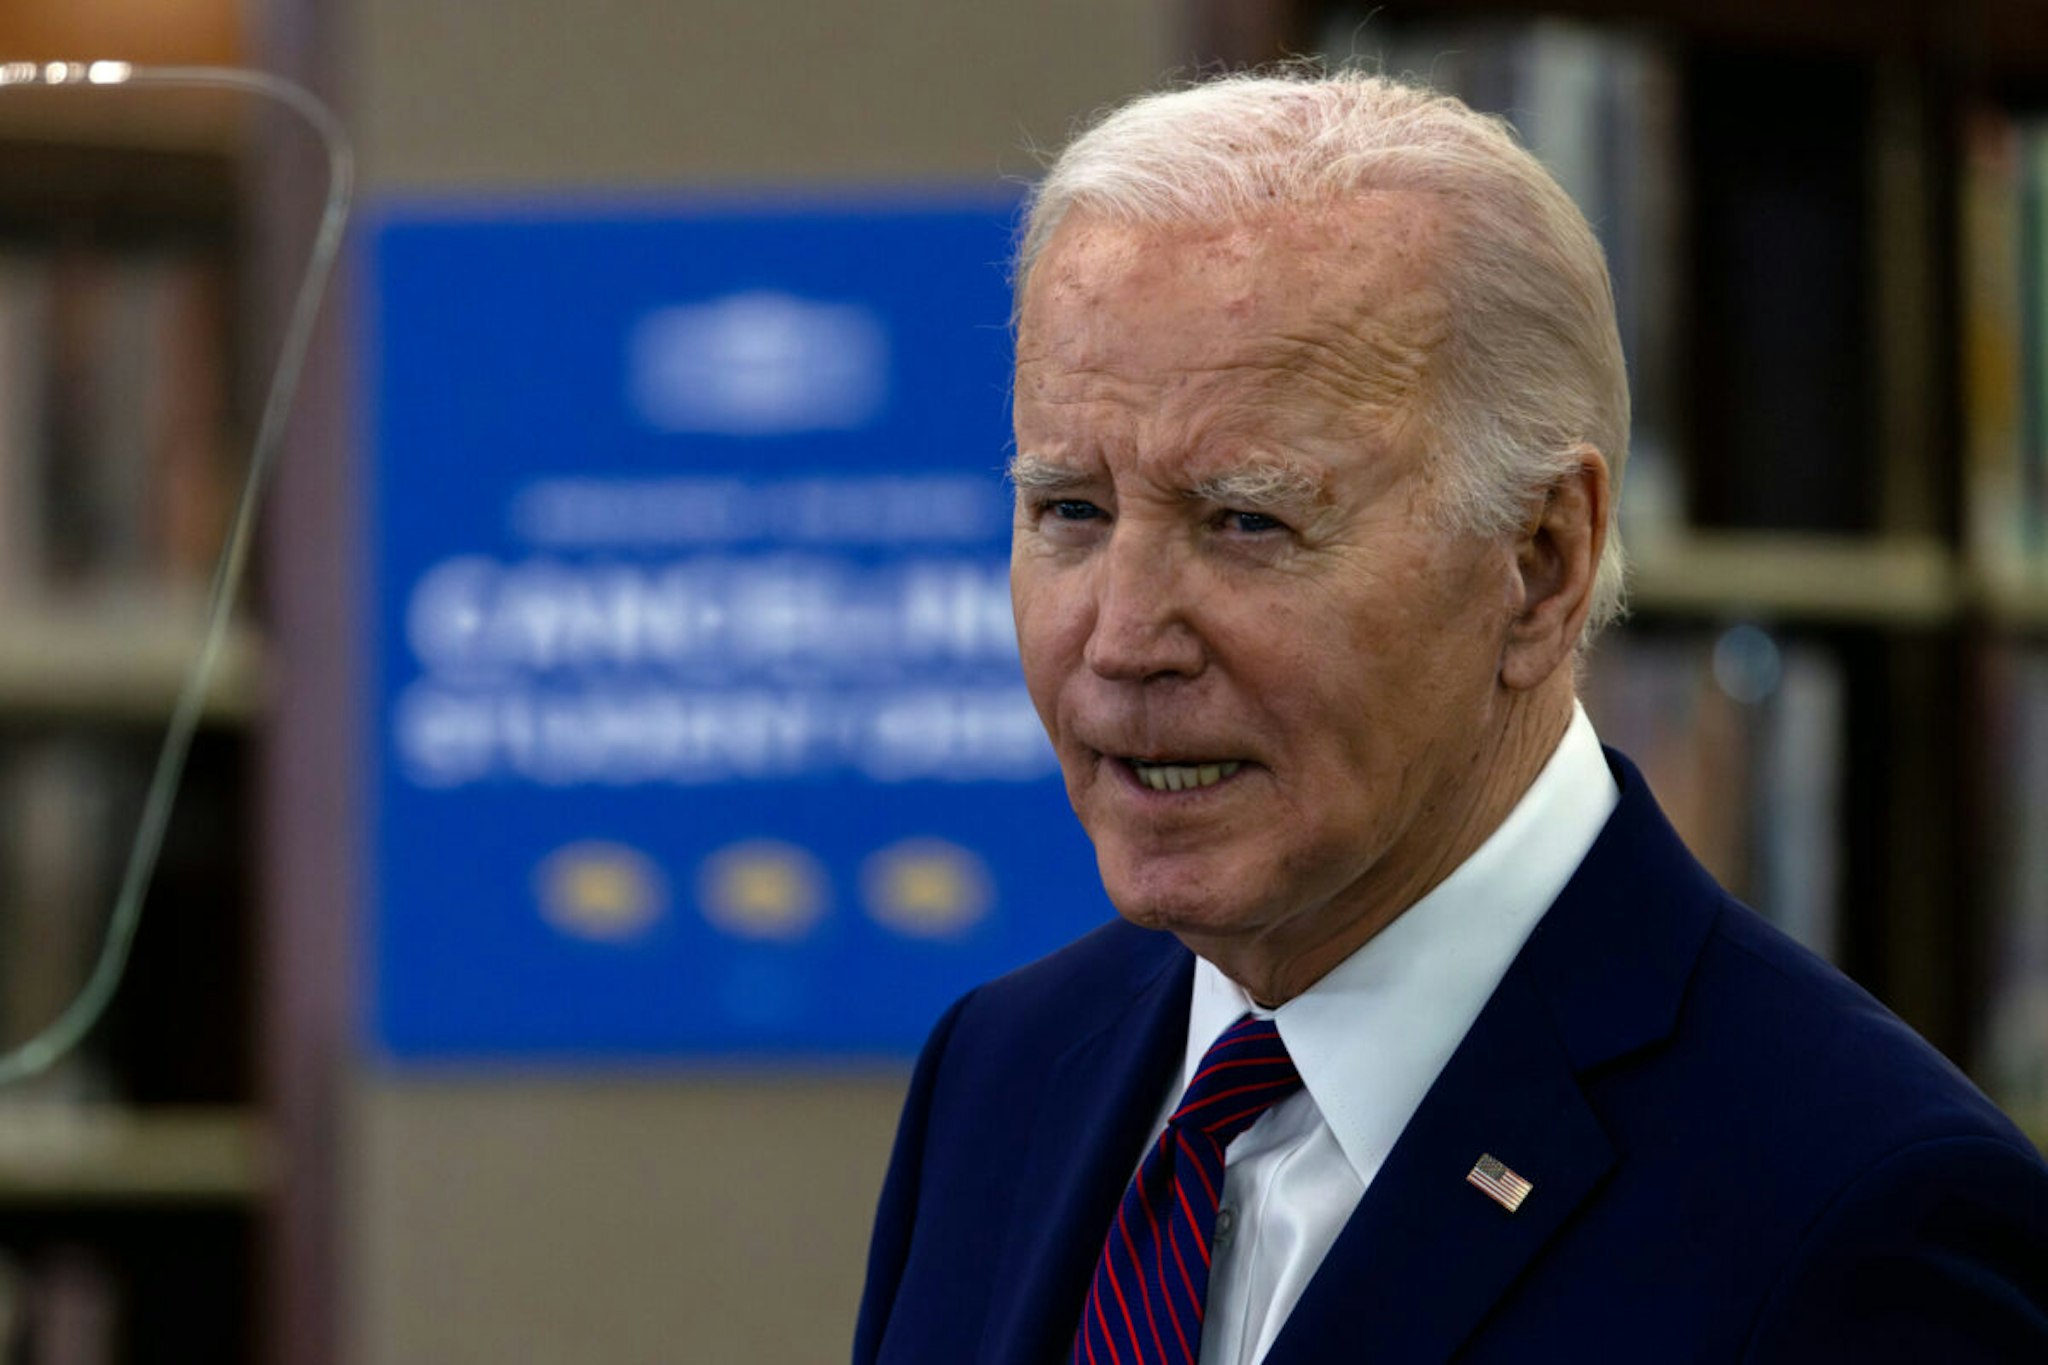 President Joe Biden announces the cancellation of an additional $1.2 billion in student loan debt for about 153,000 borrowers, at meeting with community at Culver City Julian Dixon Library in Culver City, CA.